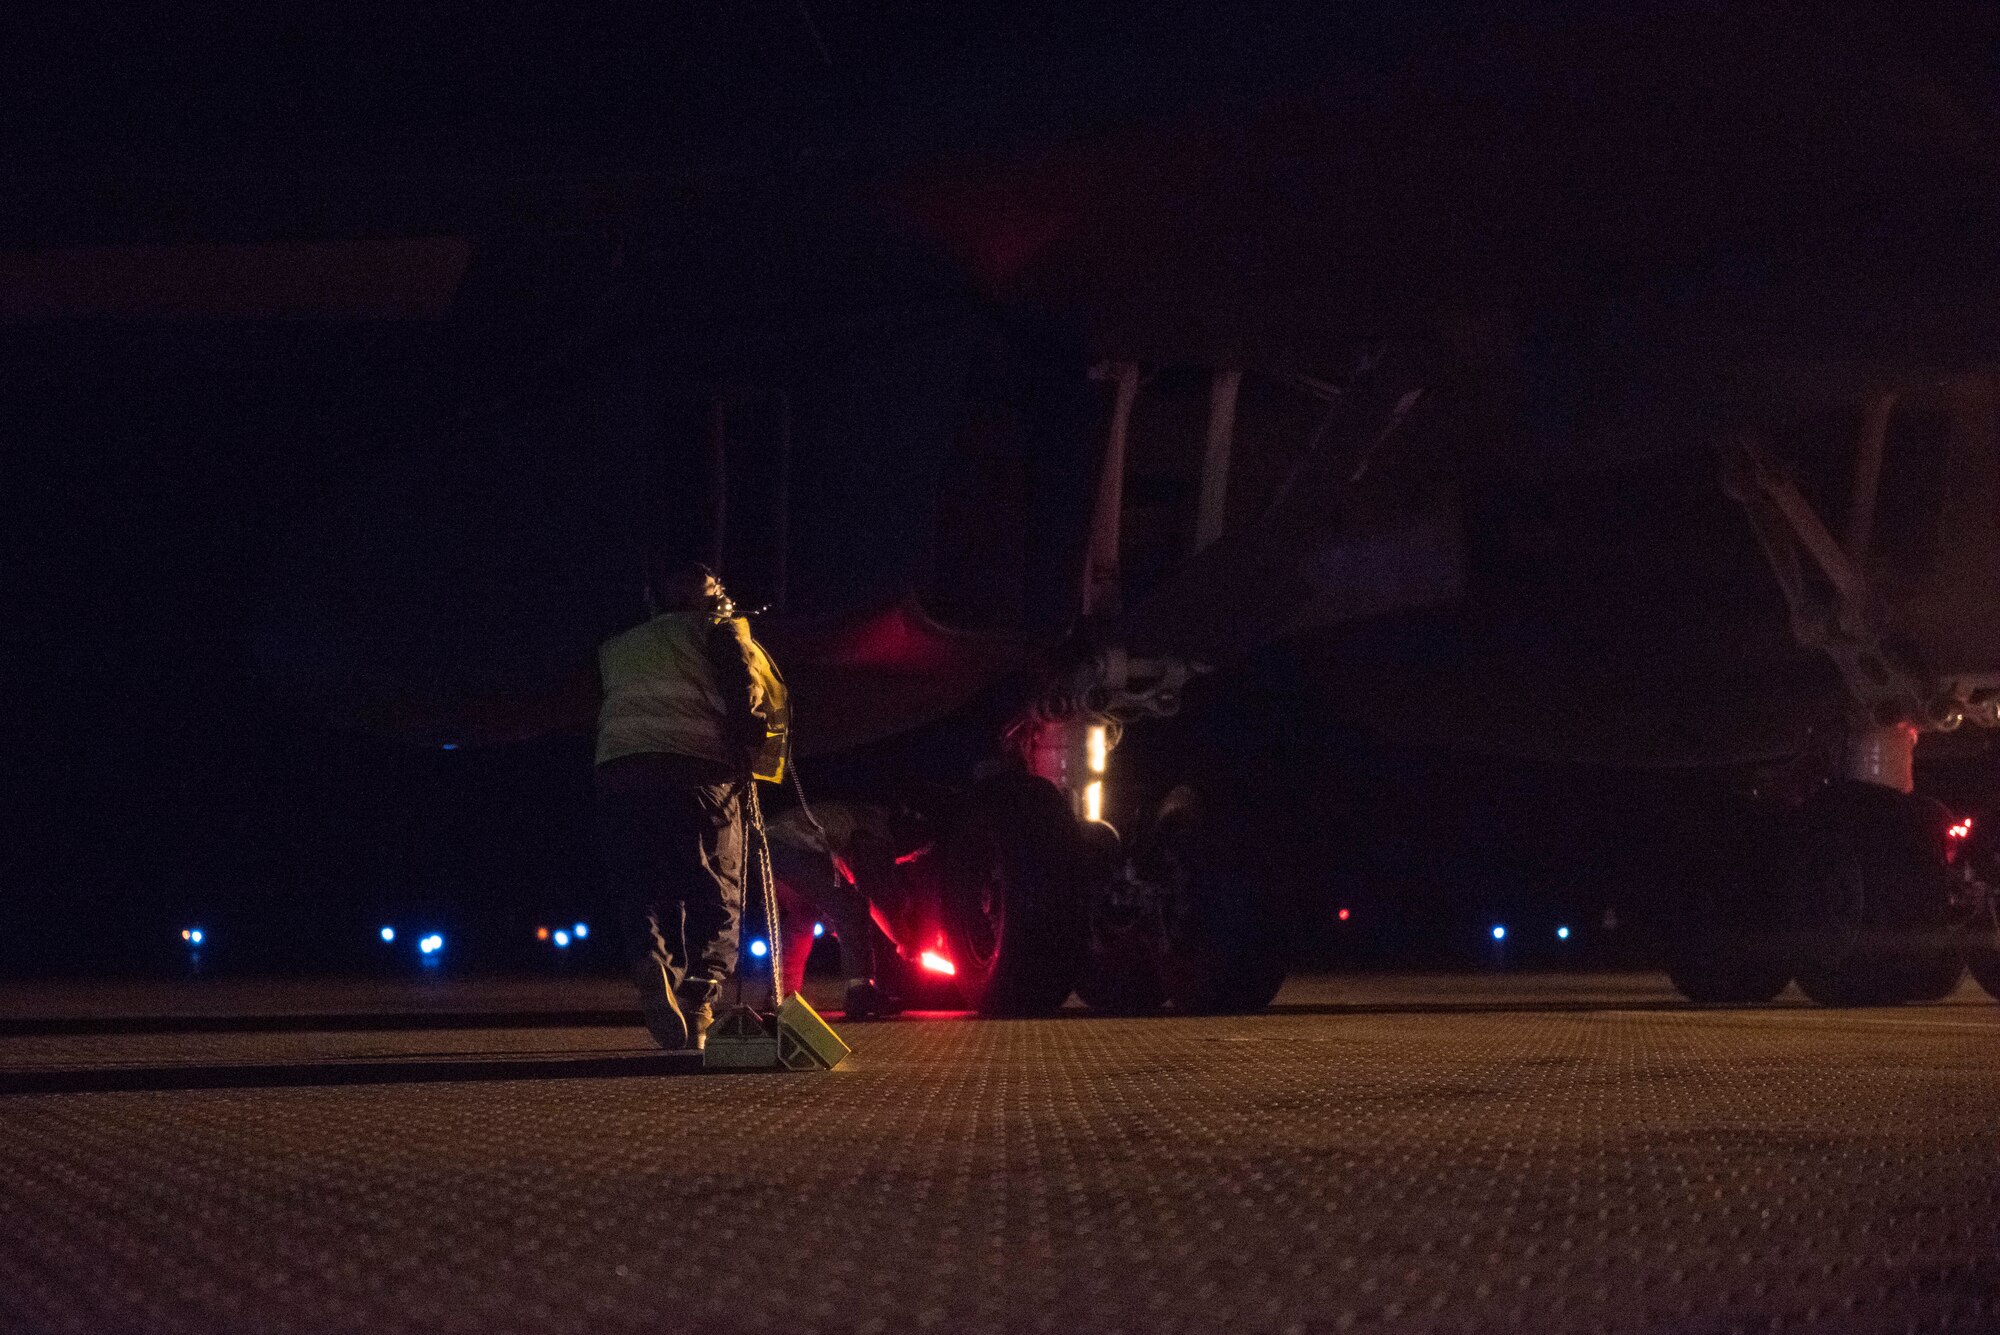 A crew chief assigned to the 9th Expeditionary Bomb Squadron drags aircraft tire chocks toward the rear landing gear of a B-1B Lancer at Ørland Air Force Station, Norway, March 19, 2021. Upon landing, aircraft maintainers are responsible for catching the jet and performing necessary immediate actions, such as chocking the tires and replacing “Remove Before Flight'' safety tags. (U.S. Air Force photo by Airman 1st Class Colin Hollowell)